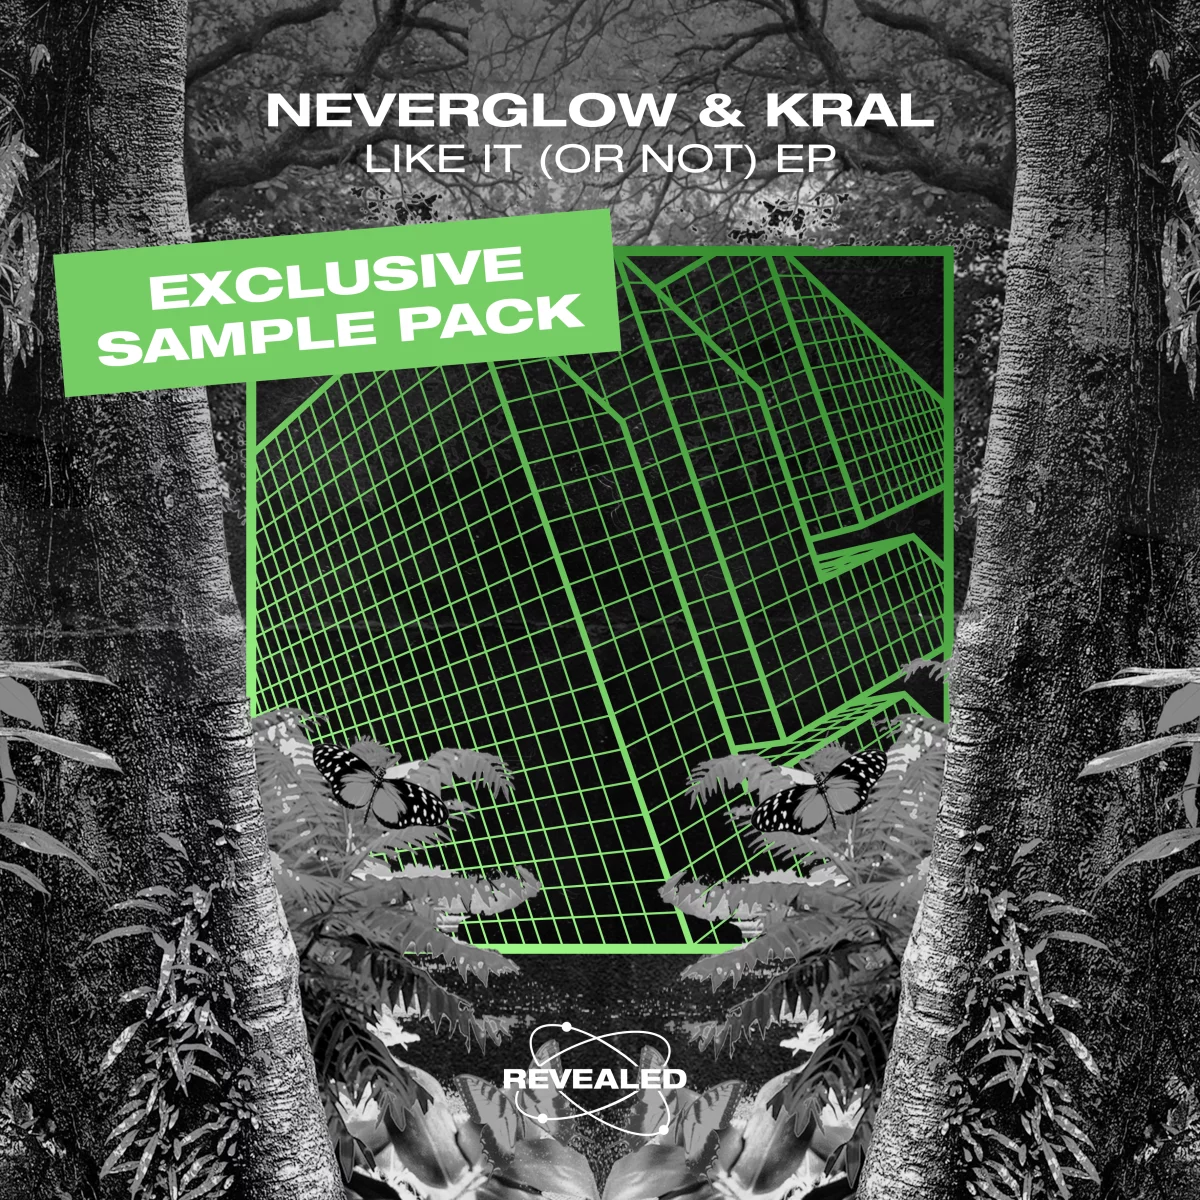 Like It (Or Not) EP [Exclusive Sample Pack] - Neverglow⁠ &⁠ KRAL⁠ 